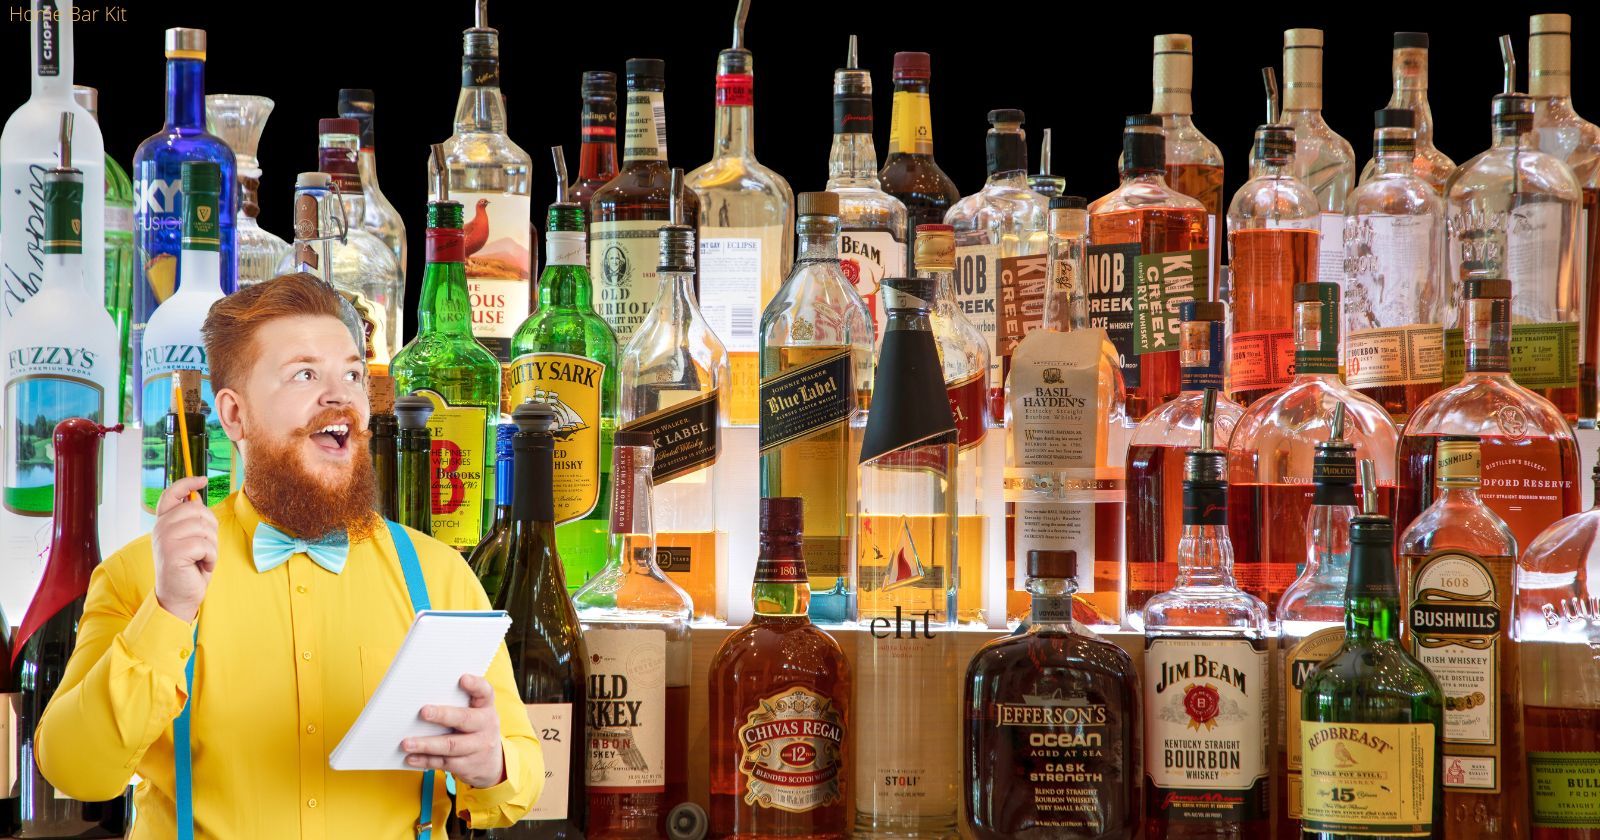 why a home bar essentials list is a waste of time